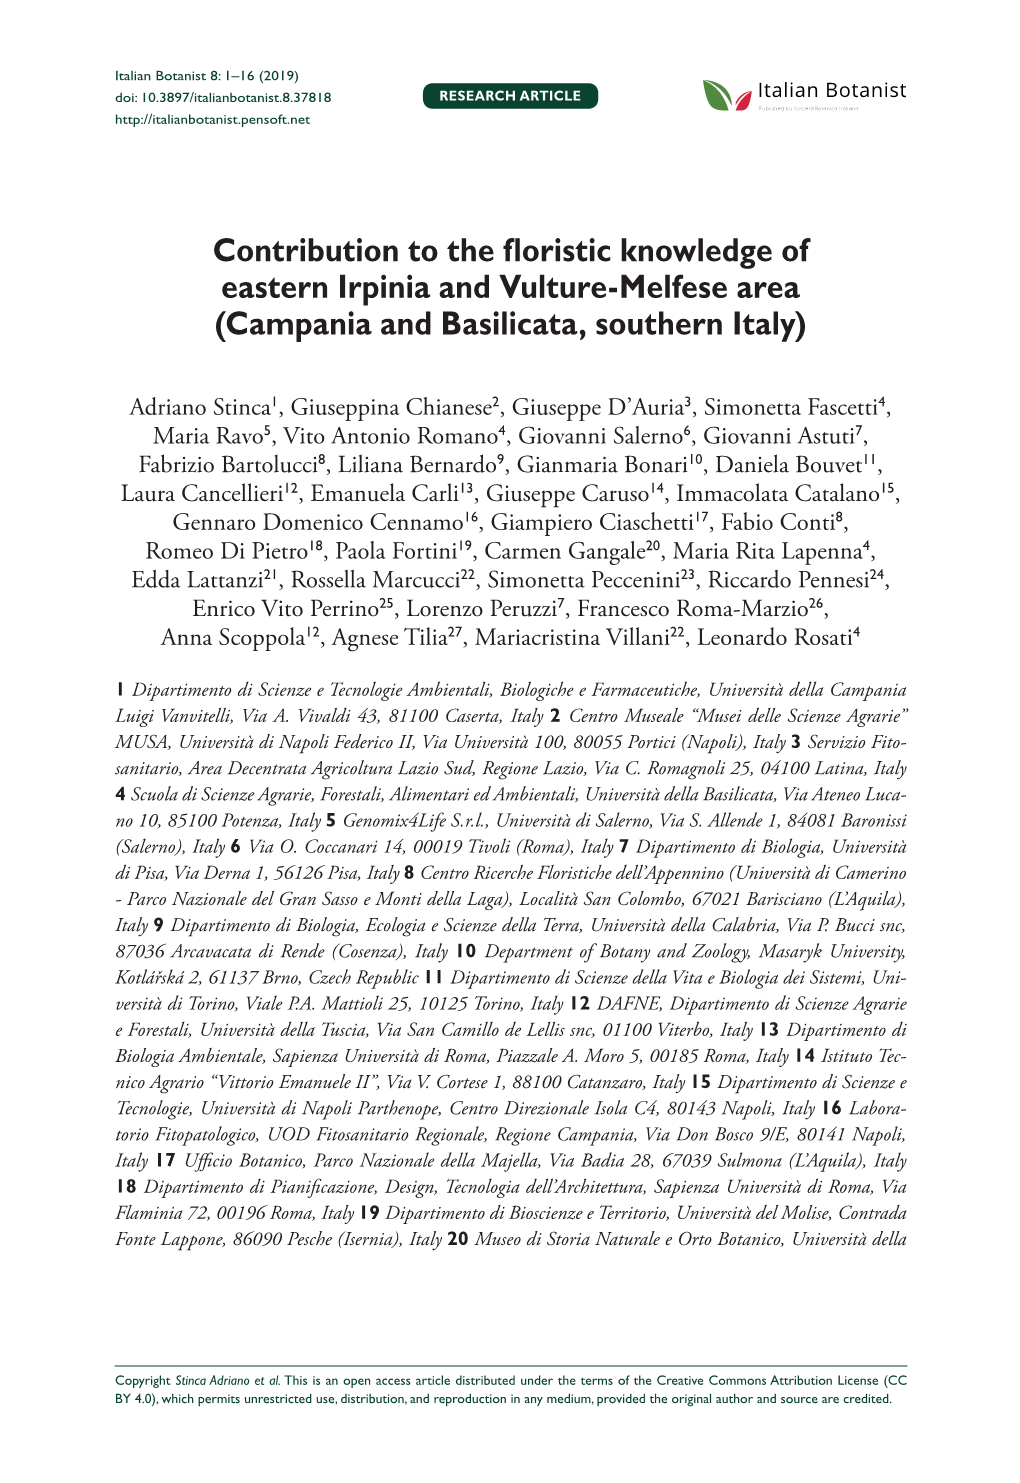 Contribution to the Floristic Knowledge of Eastern Irpinia and Vulture-Melfese Area (Campania and Basilicata, Southern Italy)